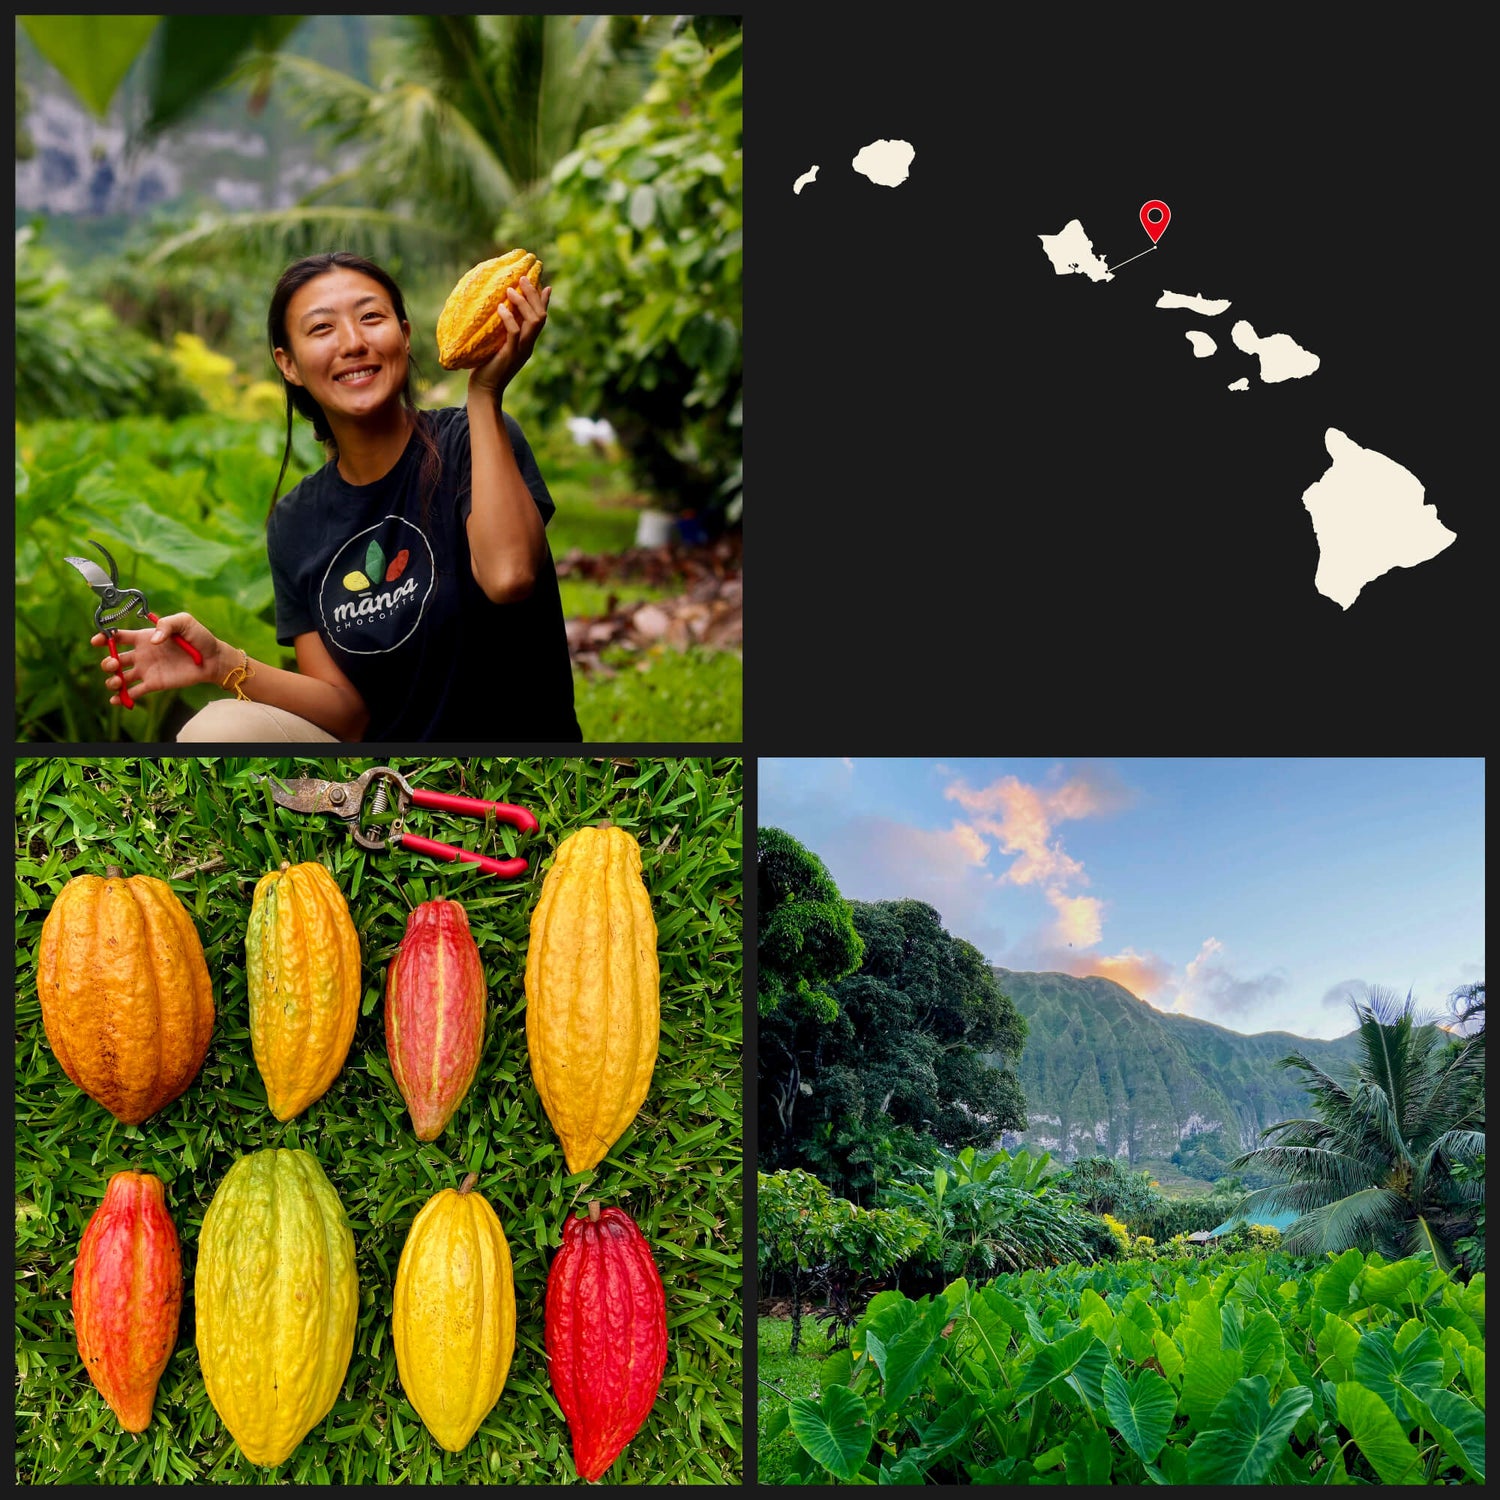 Images of cacao pods, farmland, and a map of the Hawaiian Islands